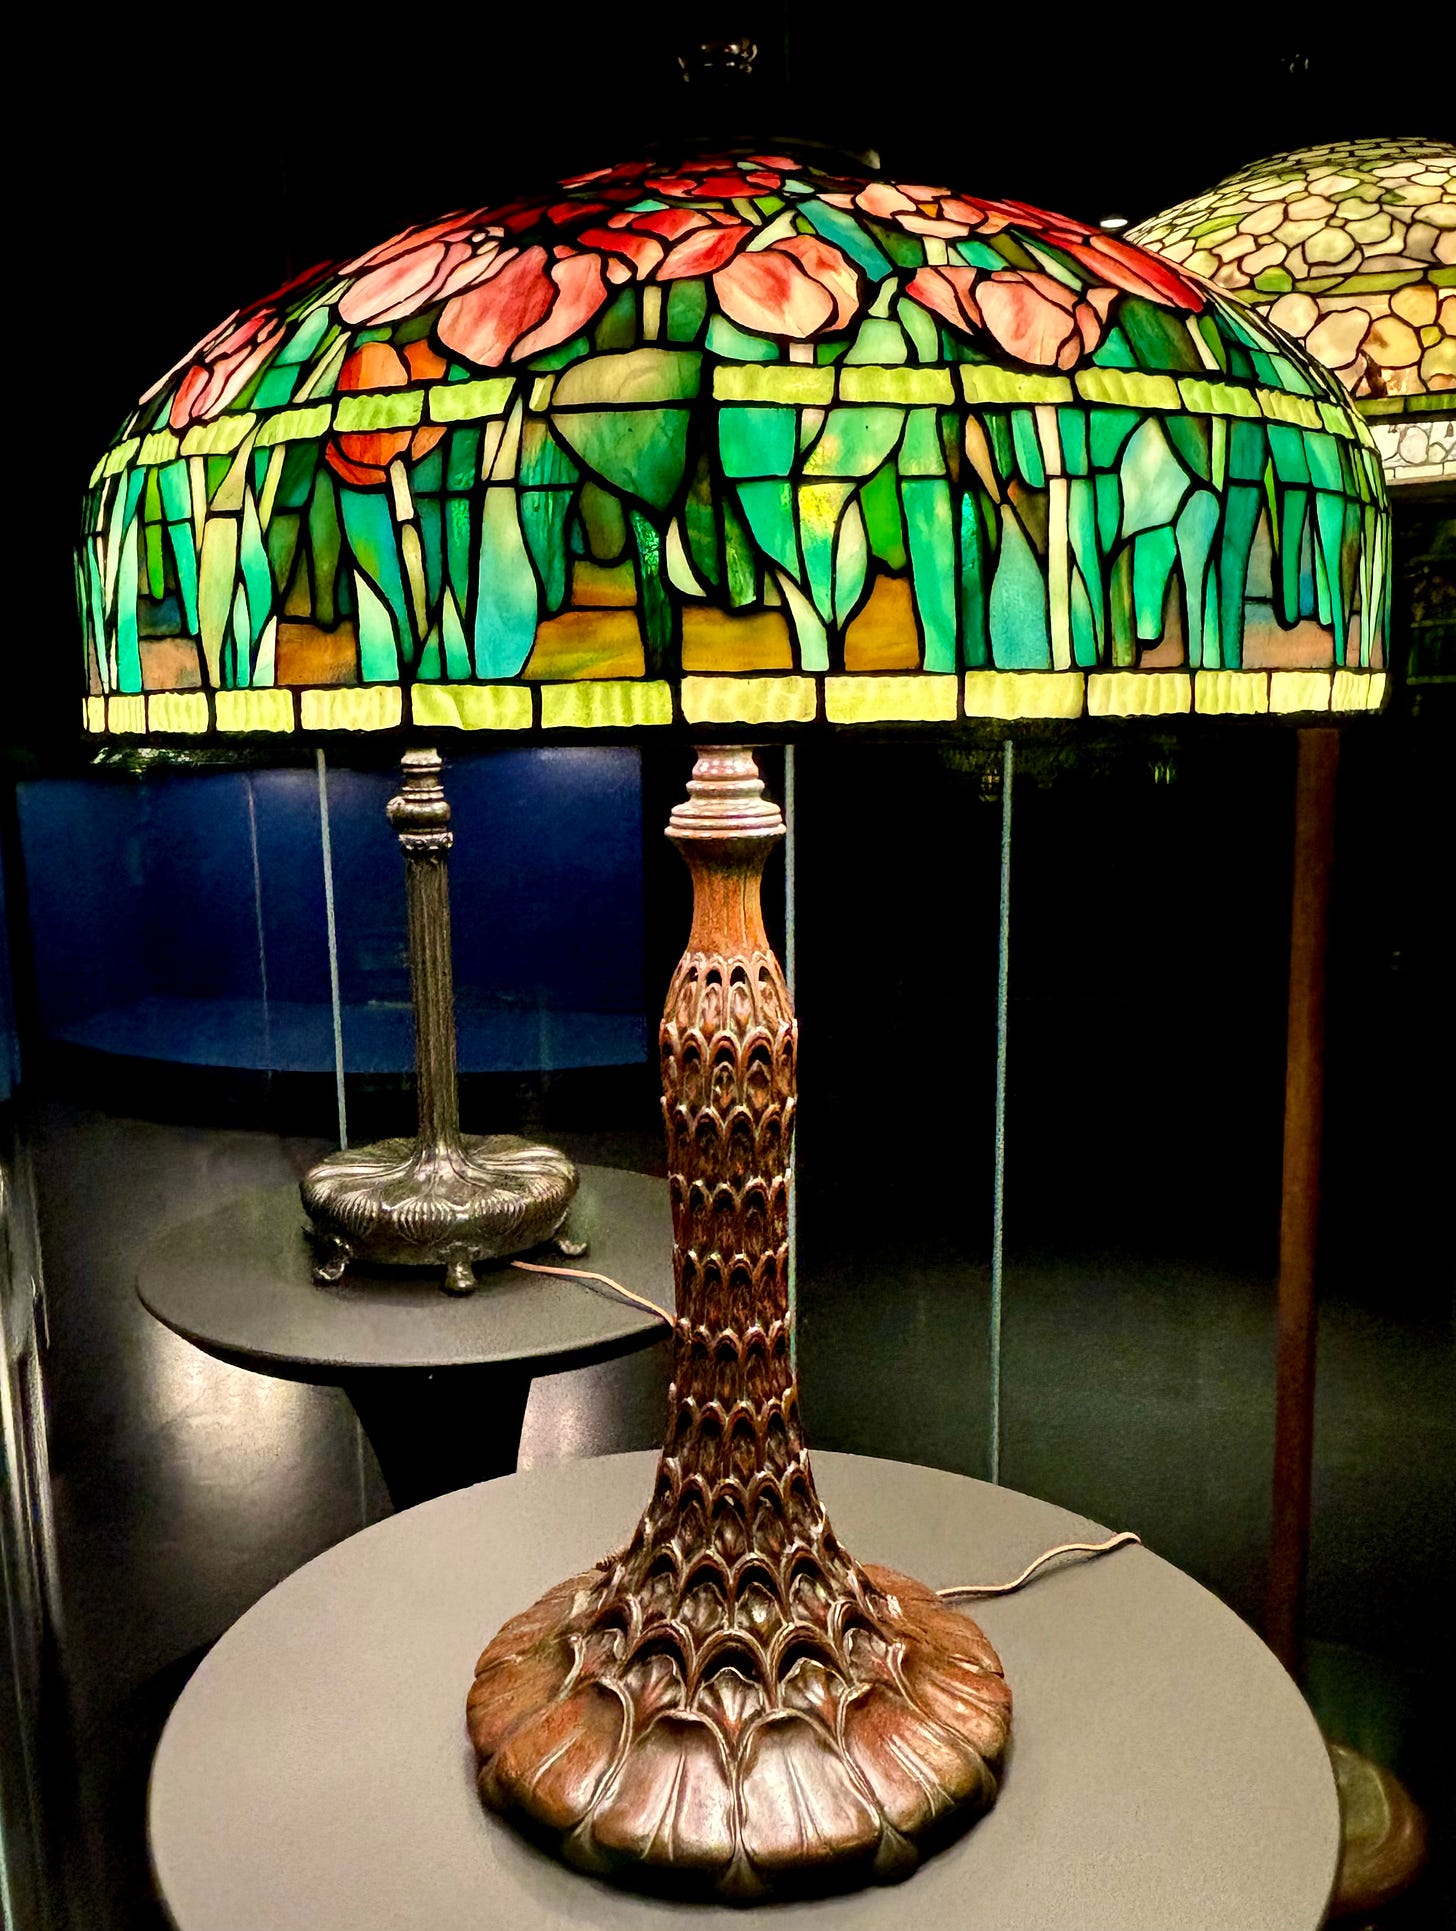 A glass lampshade that is a mosaic of red tulips atop an ornate base.